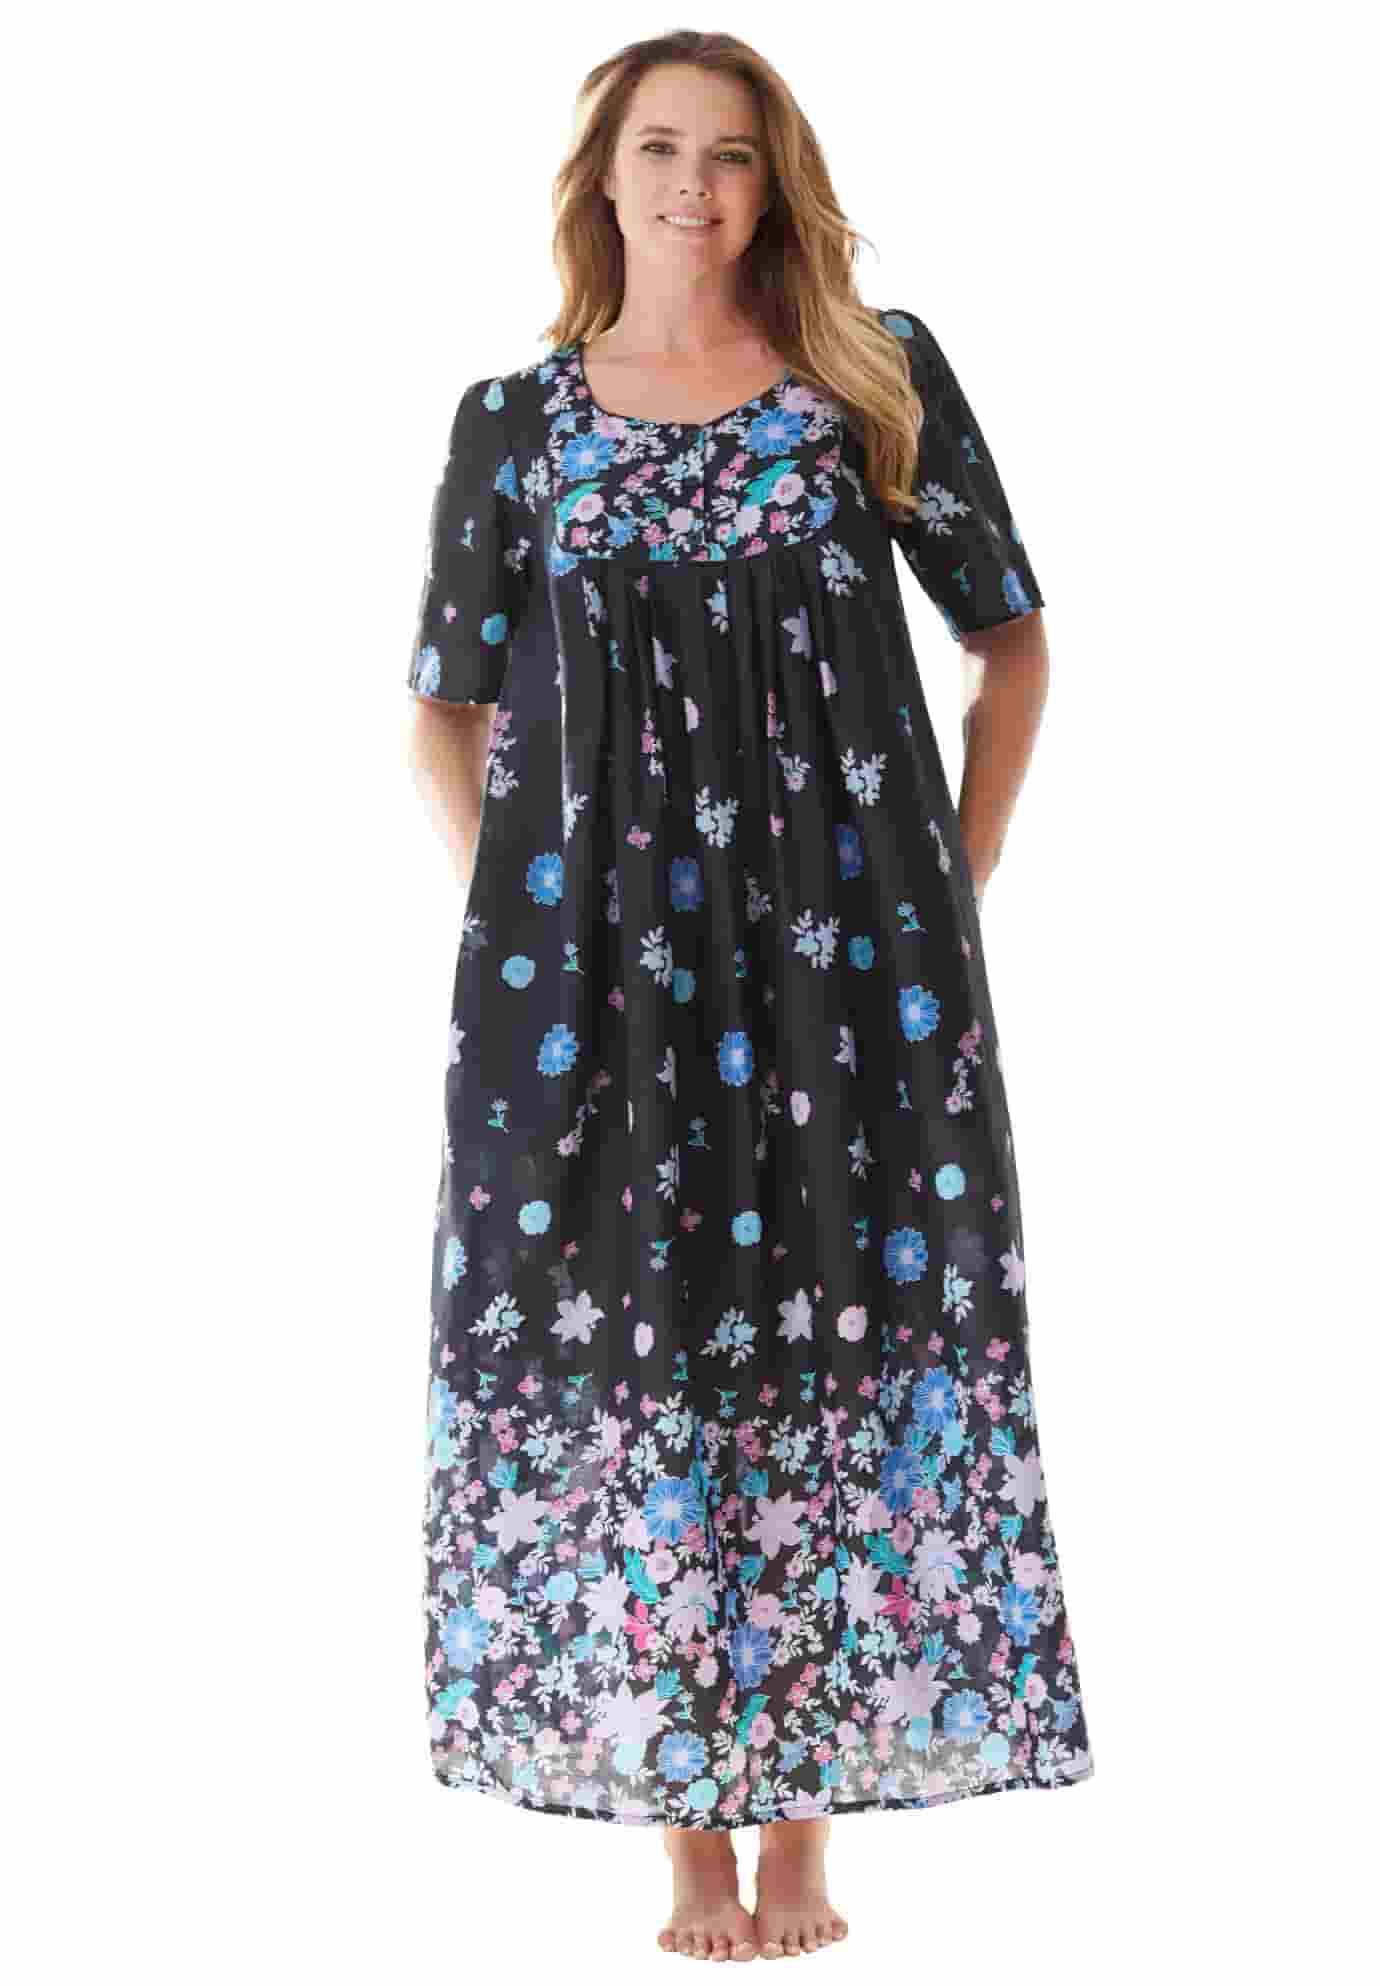 Plus Size Women’s Nightgown by Only Necessities